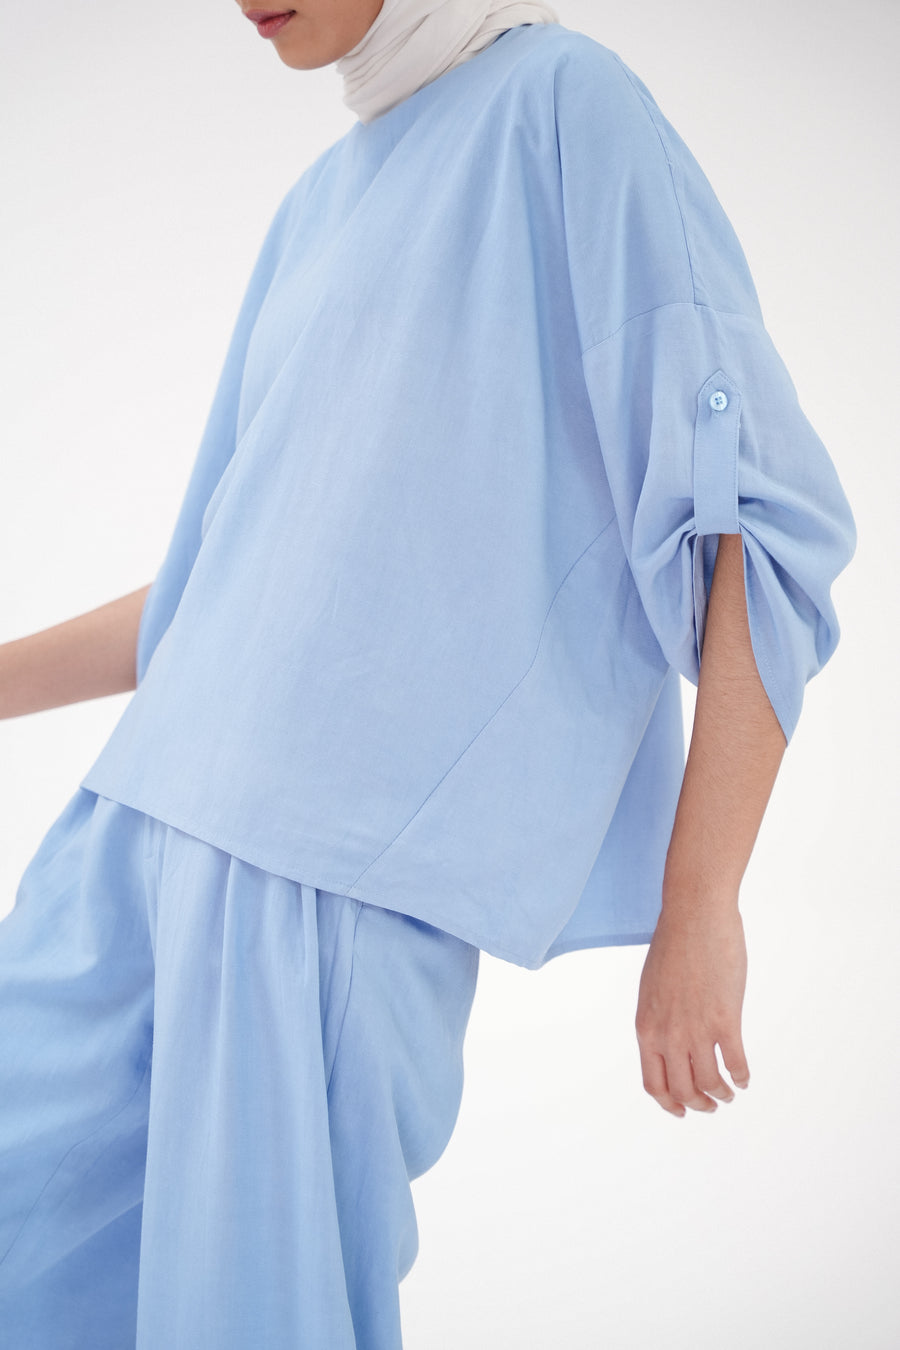 All-Rounder Blouse in Baby Blue